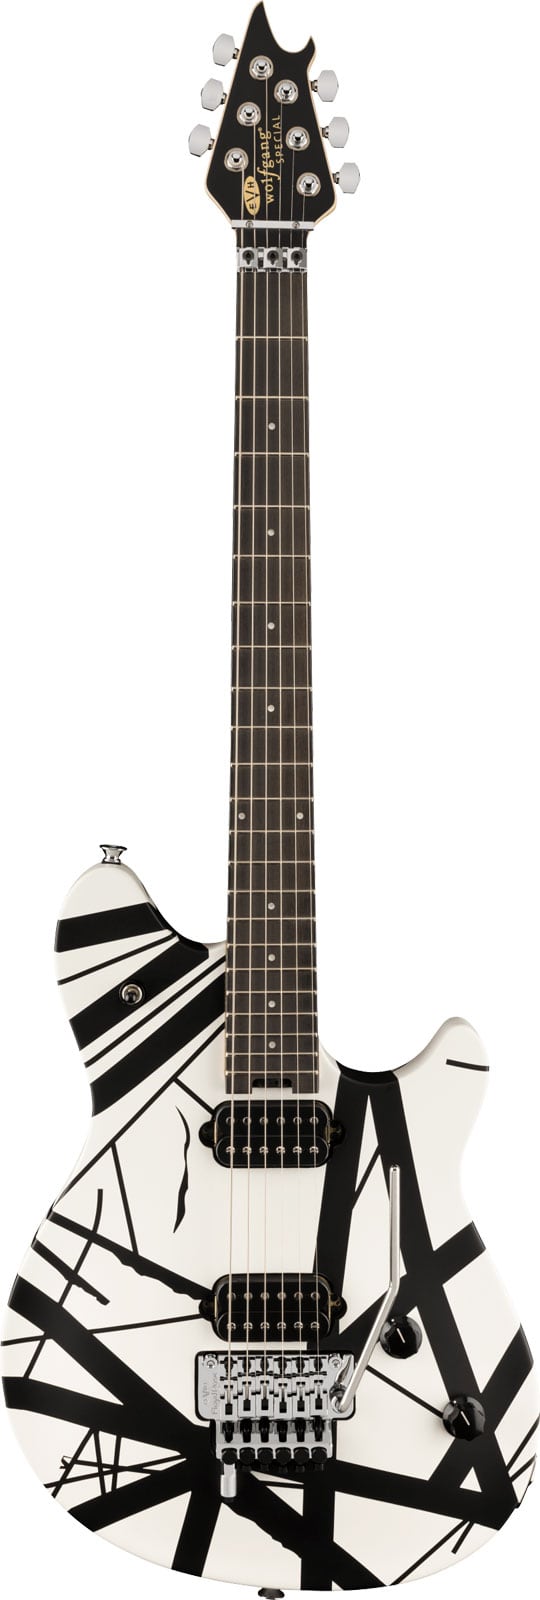 EVH WOLFGANG SPECIAL STRIPED SERIES, EBONY FINGERBOARD, BLACK AND WHITE